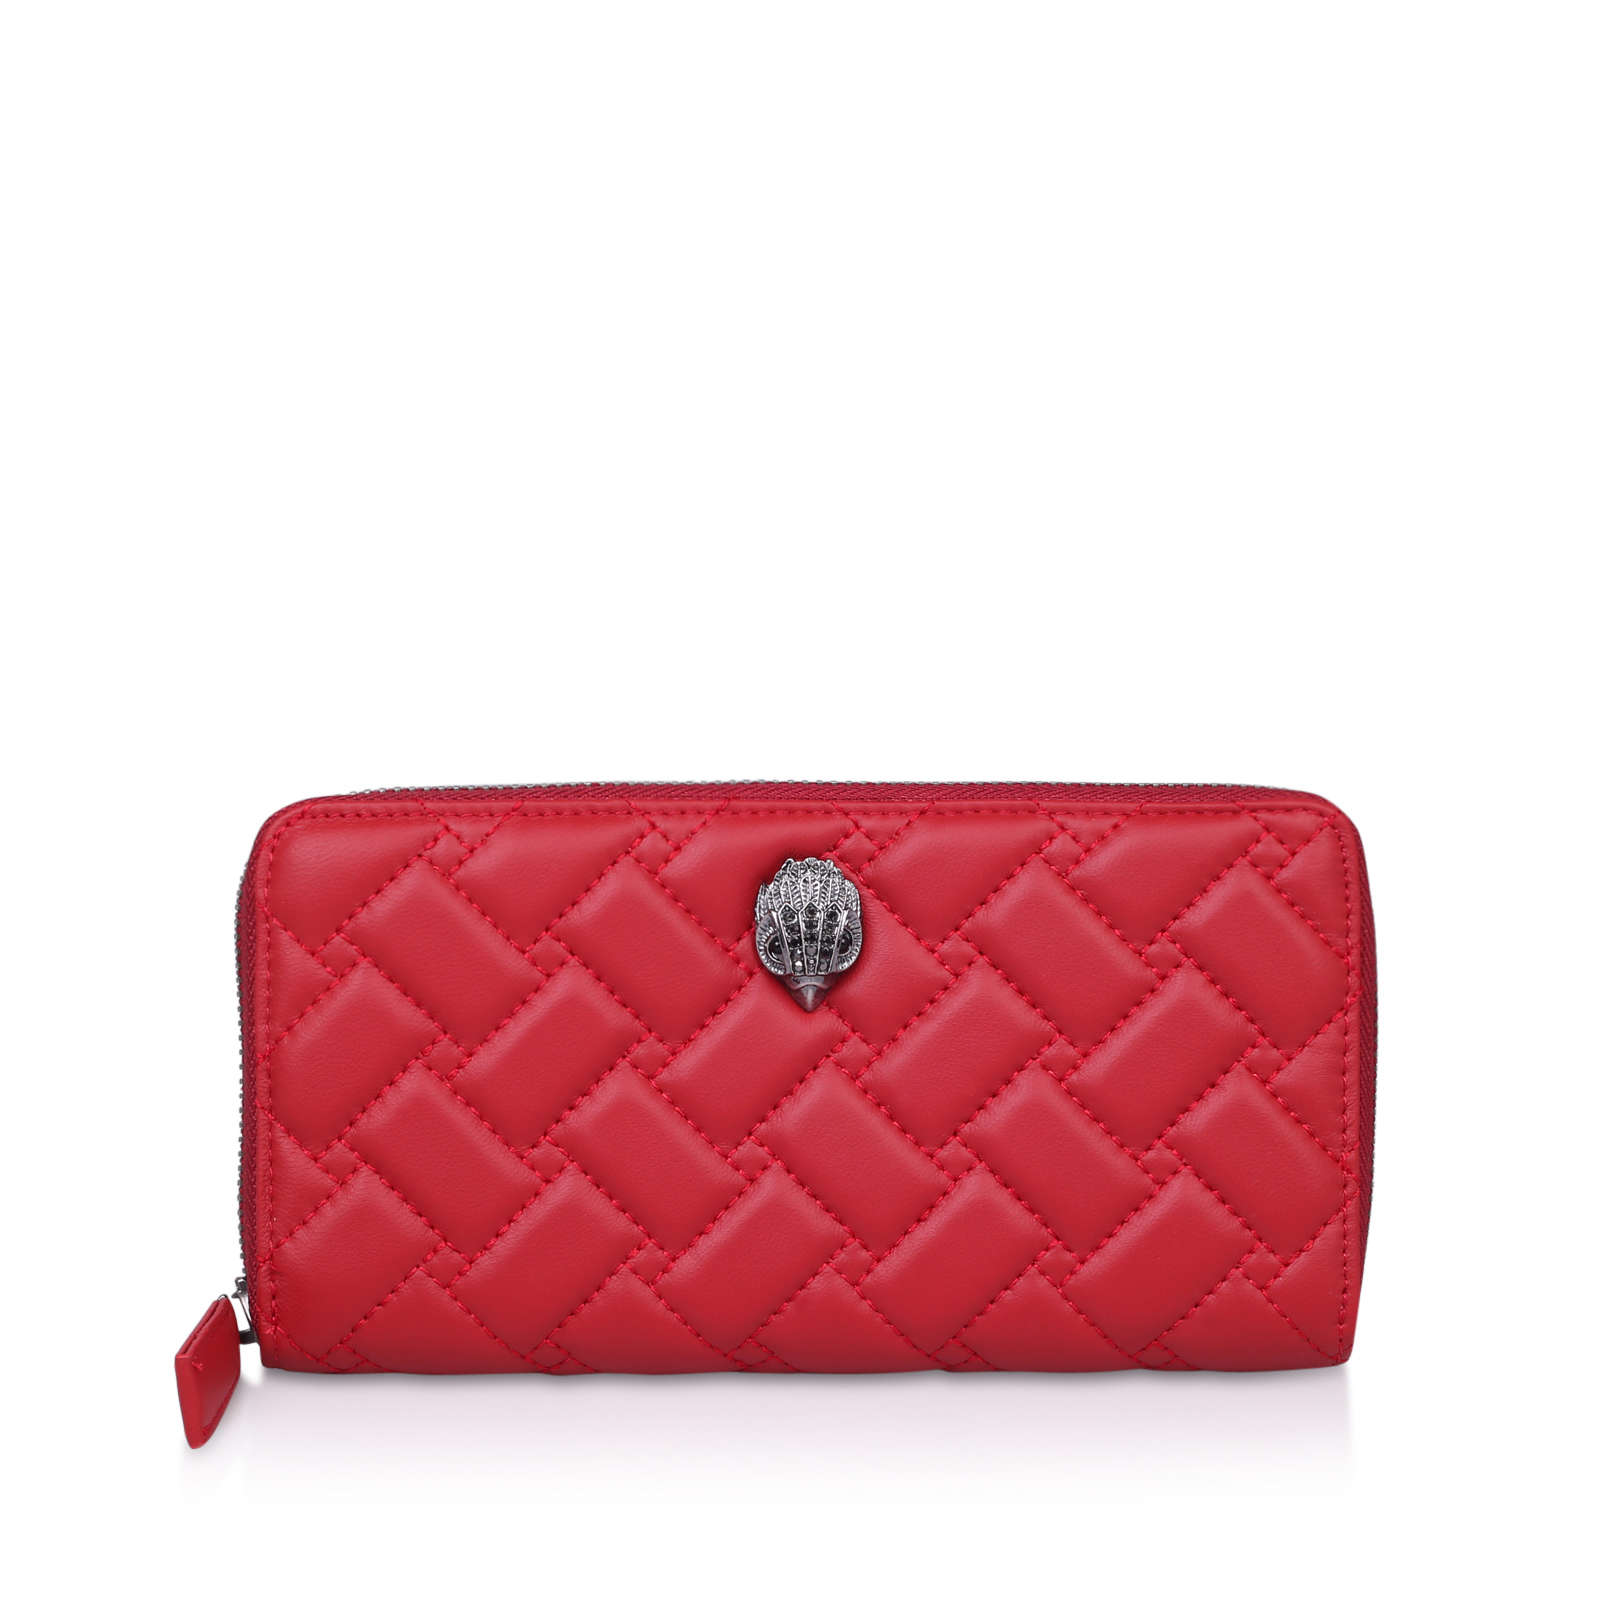 Kurt Geiger London Eagle Leather Zip Around Wallet | The Art of Mike ...